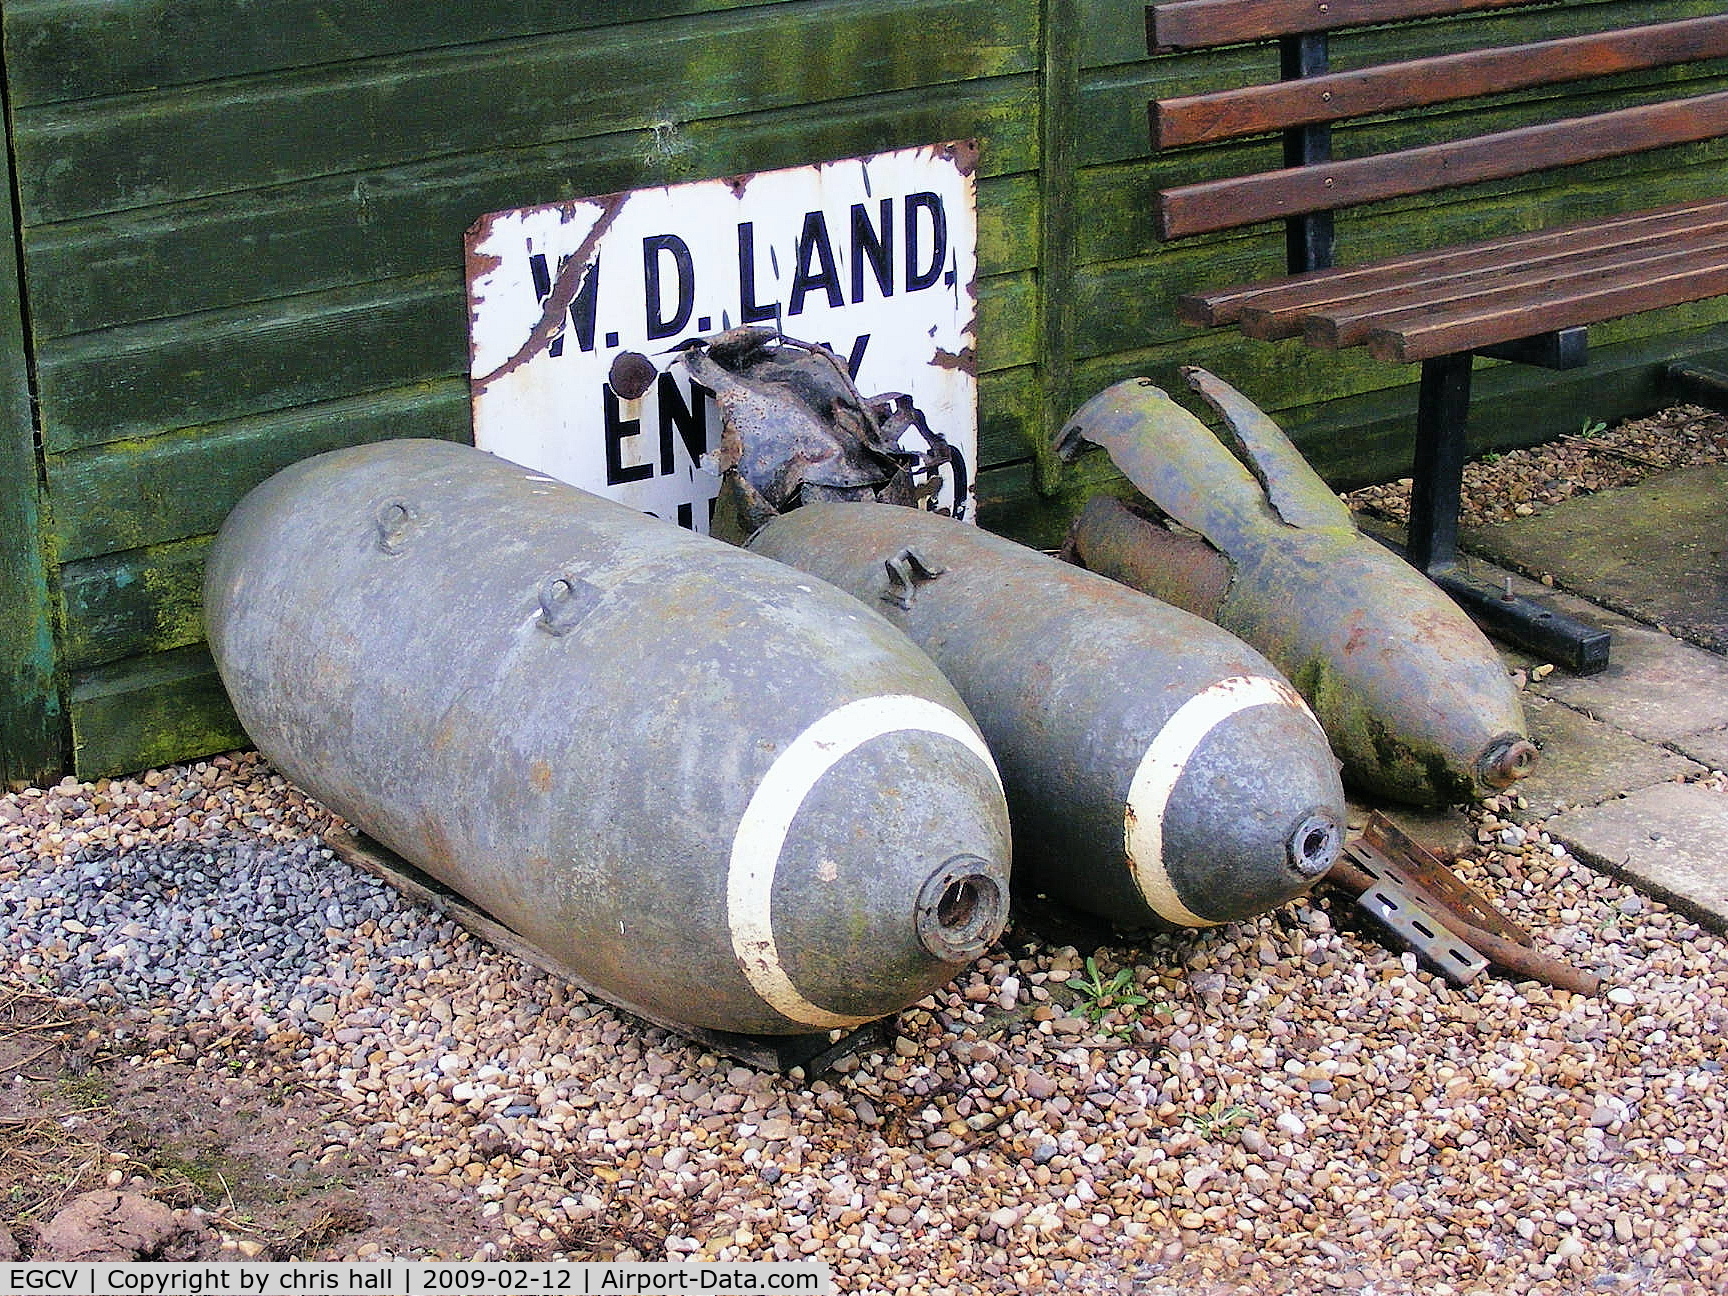 Sleap Airfield Airport, Shrewsbury, England United Kingdom (EGCV) - outside of the Wartime Aircraft Recovery Group Museum at Sleap